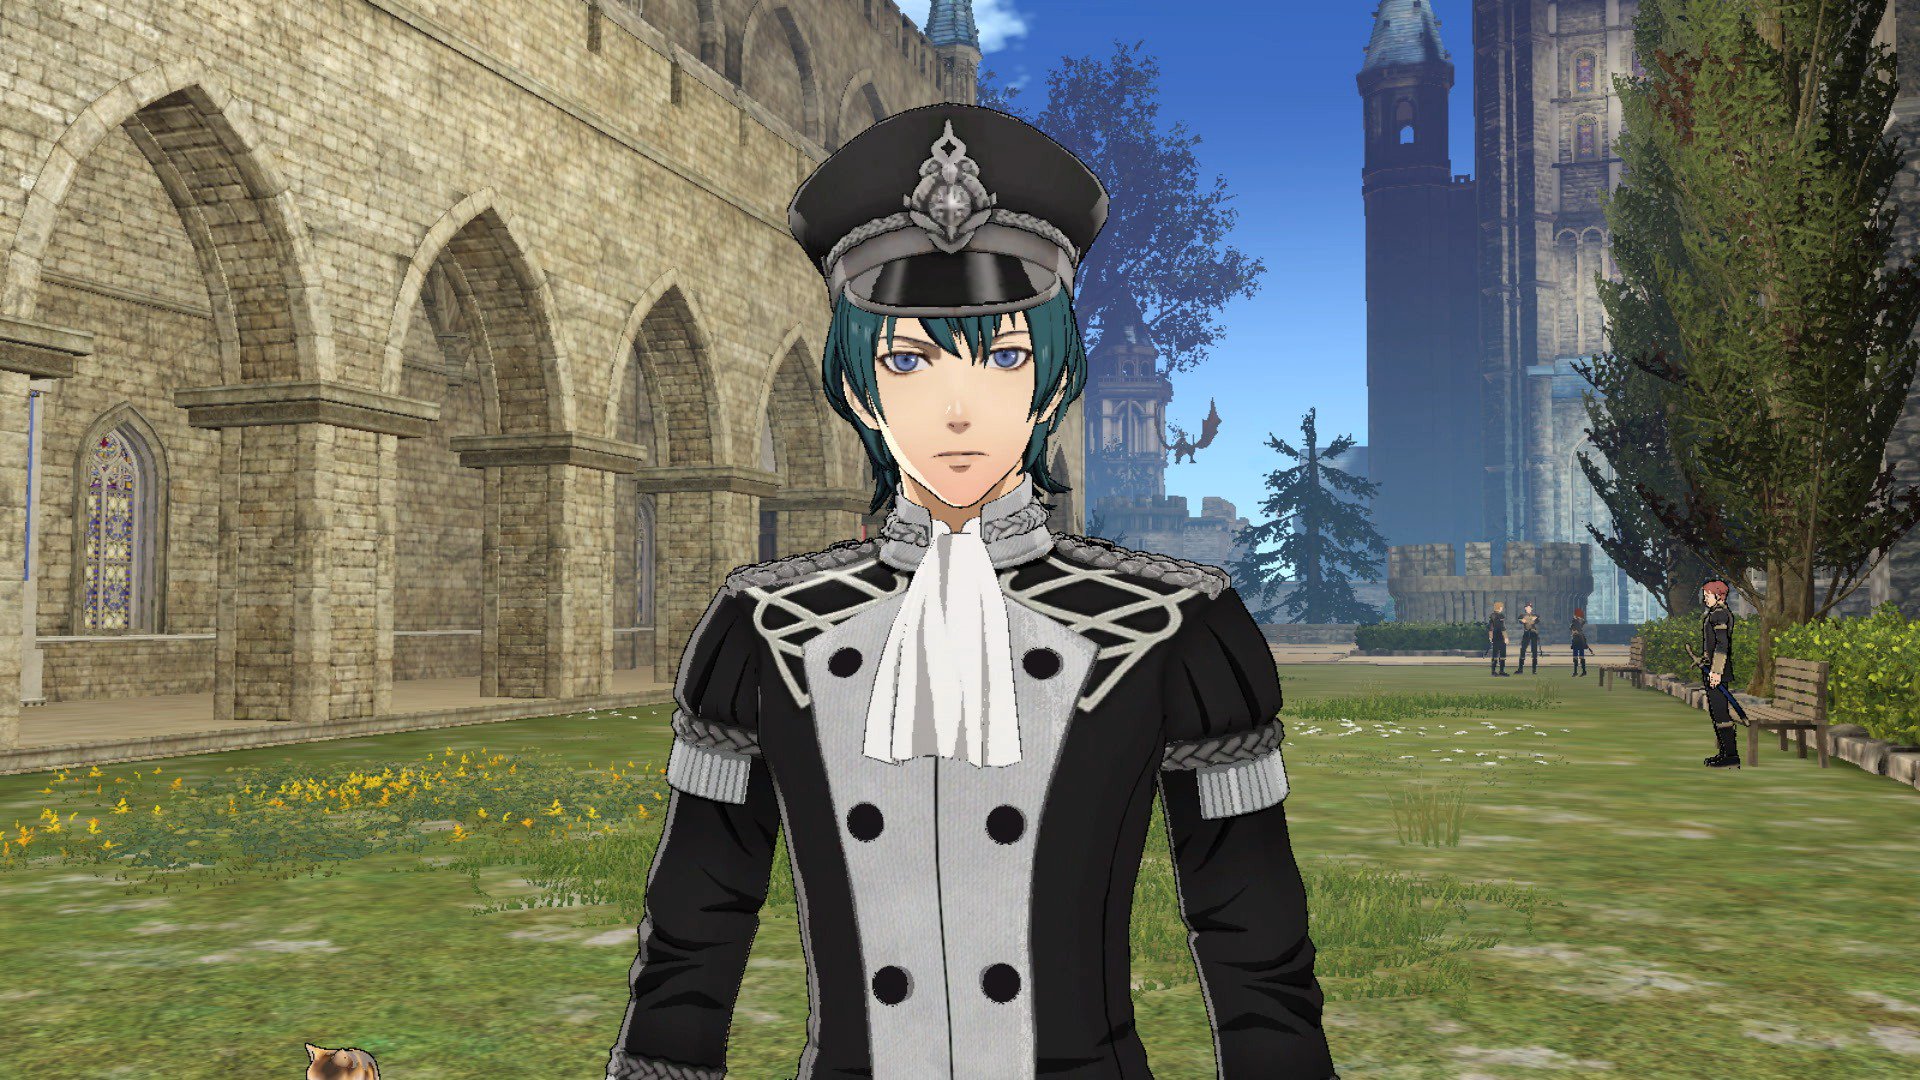 Byleth in the officers academy outfit